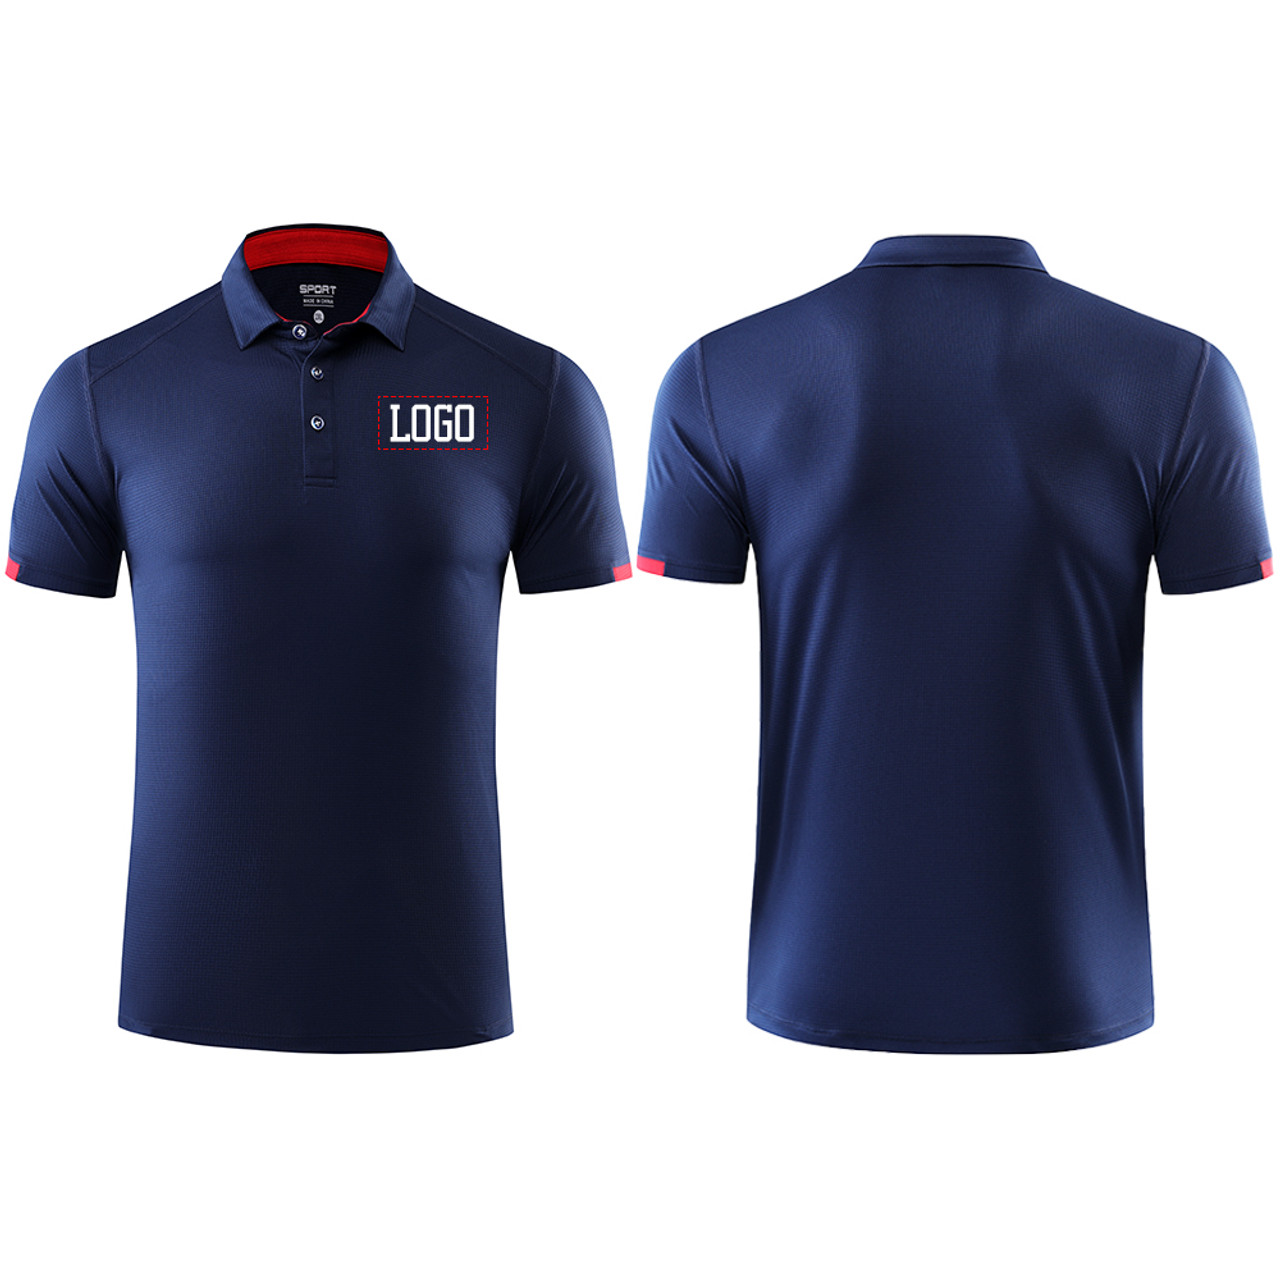 custom polo shirts with your logo customize men's shirt for team club